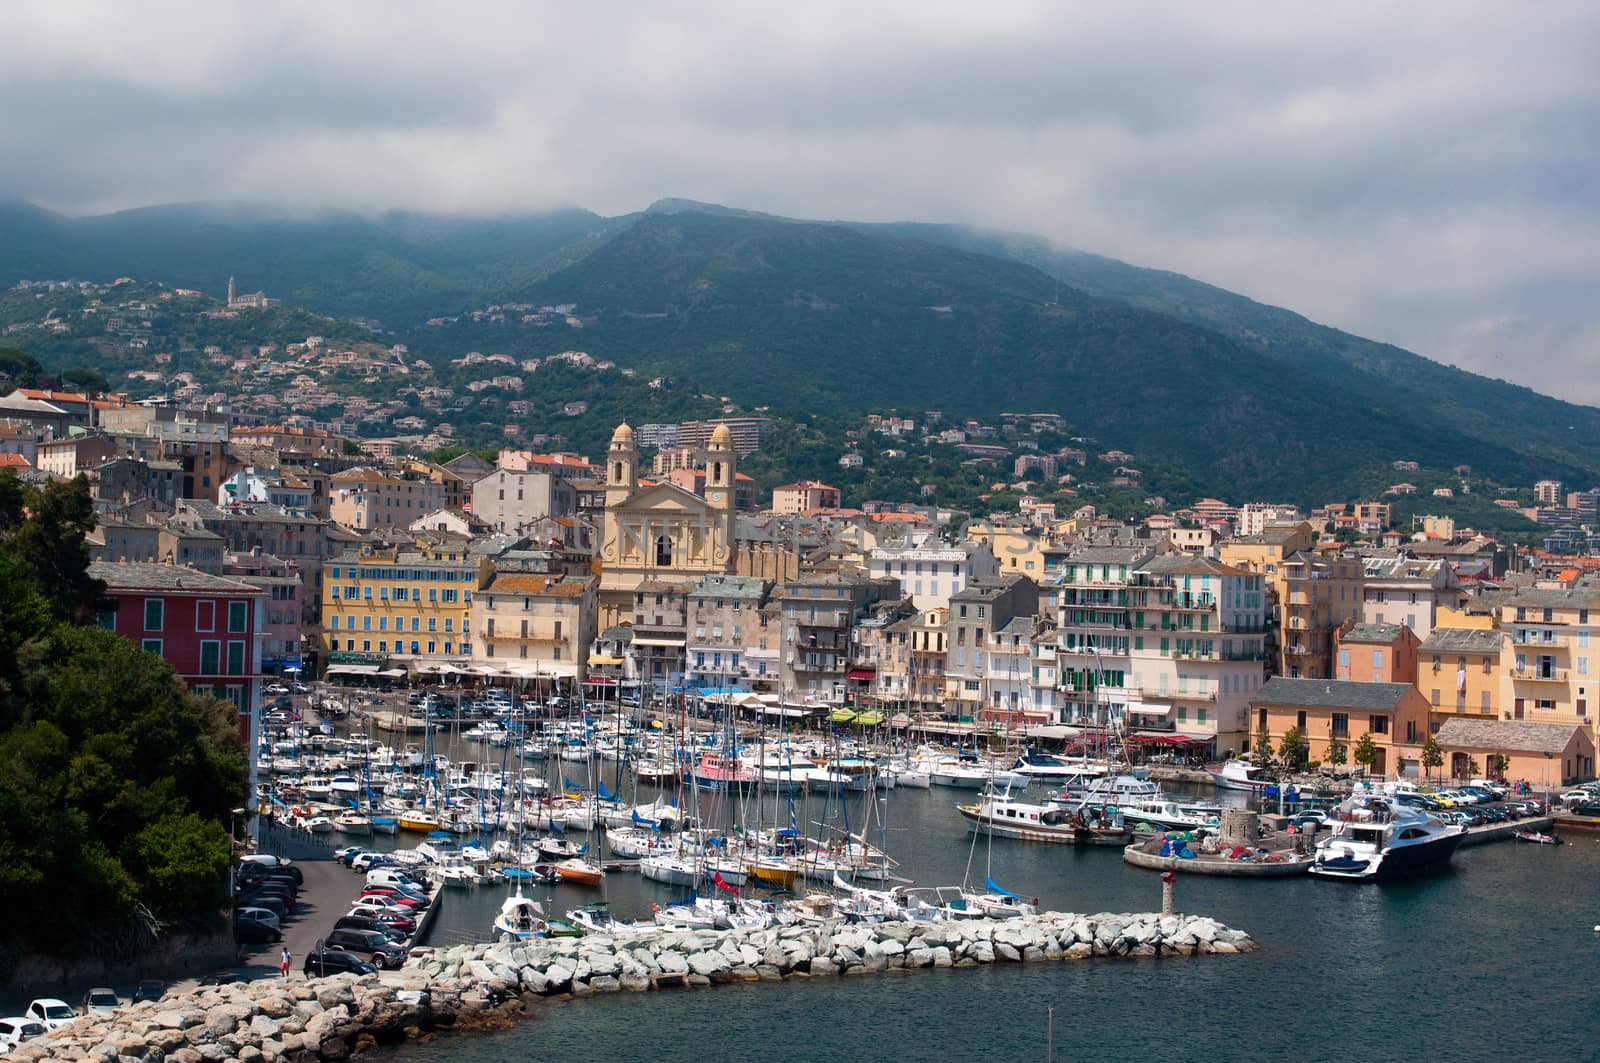 Old port and church of St John the Baptist in Bastia. Corsica, France. by lexan